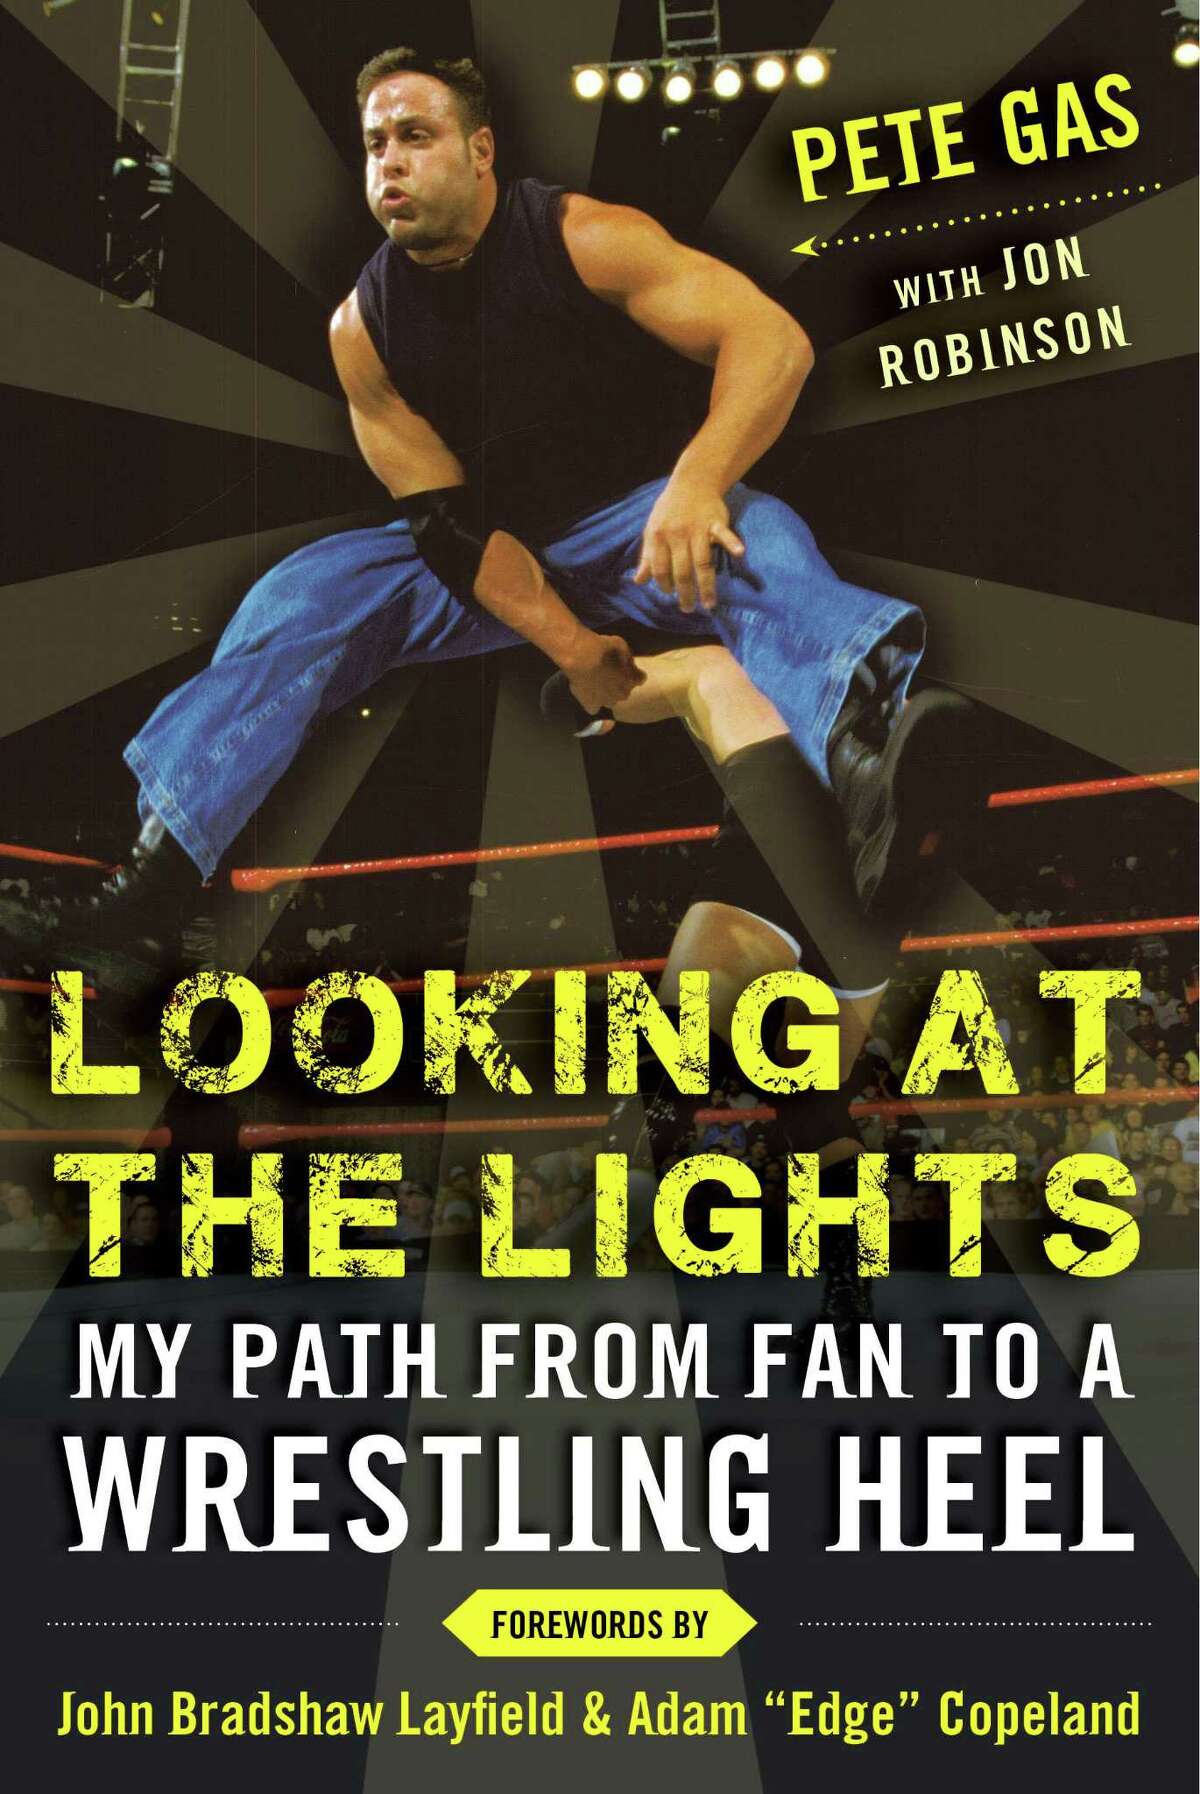 Cover of Greenwich native Pete Gasparino's new book about his life in wrestling.